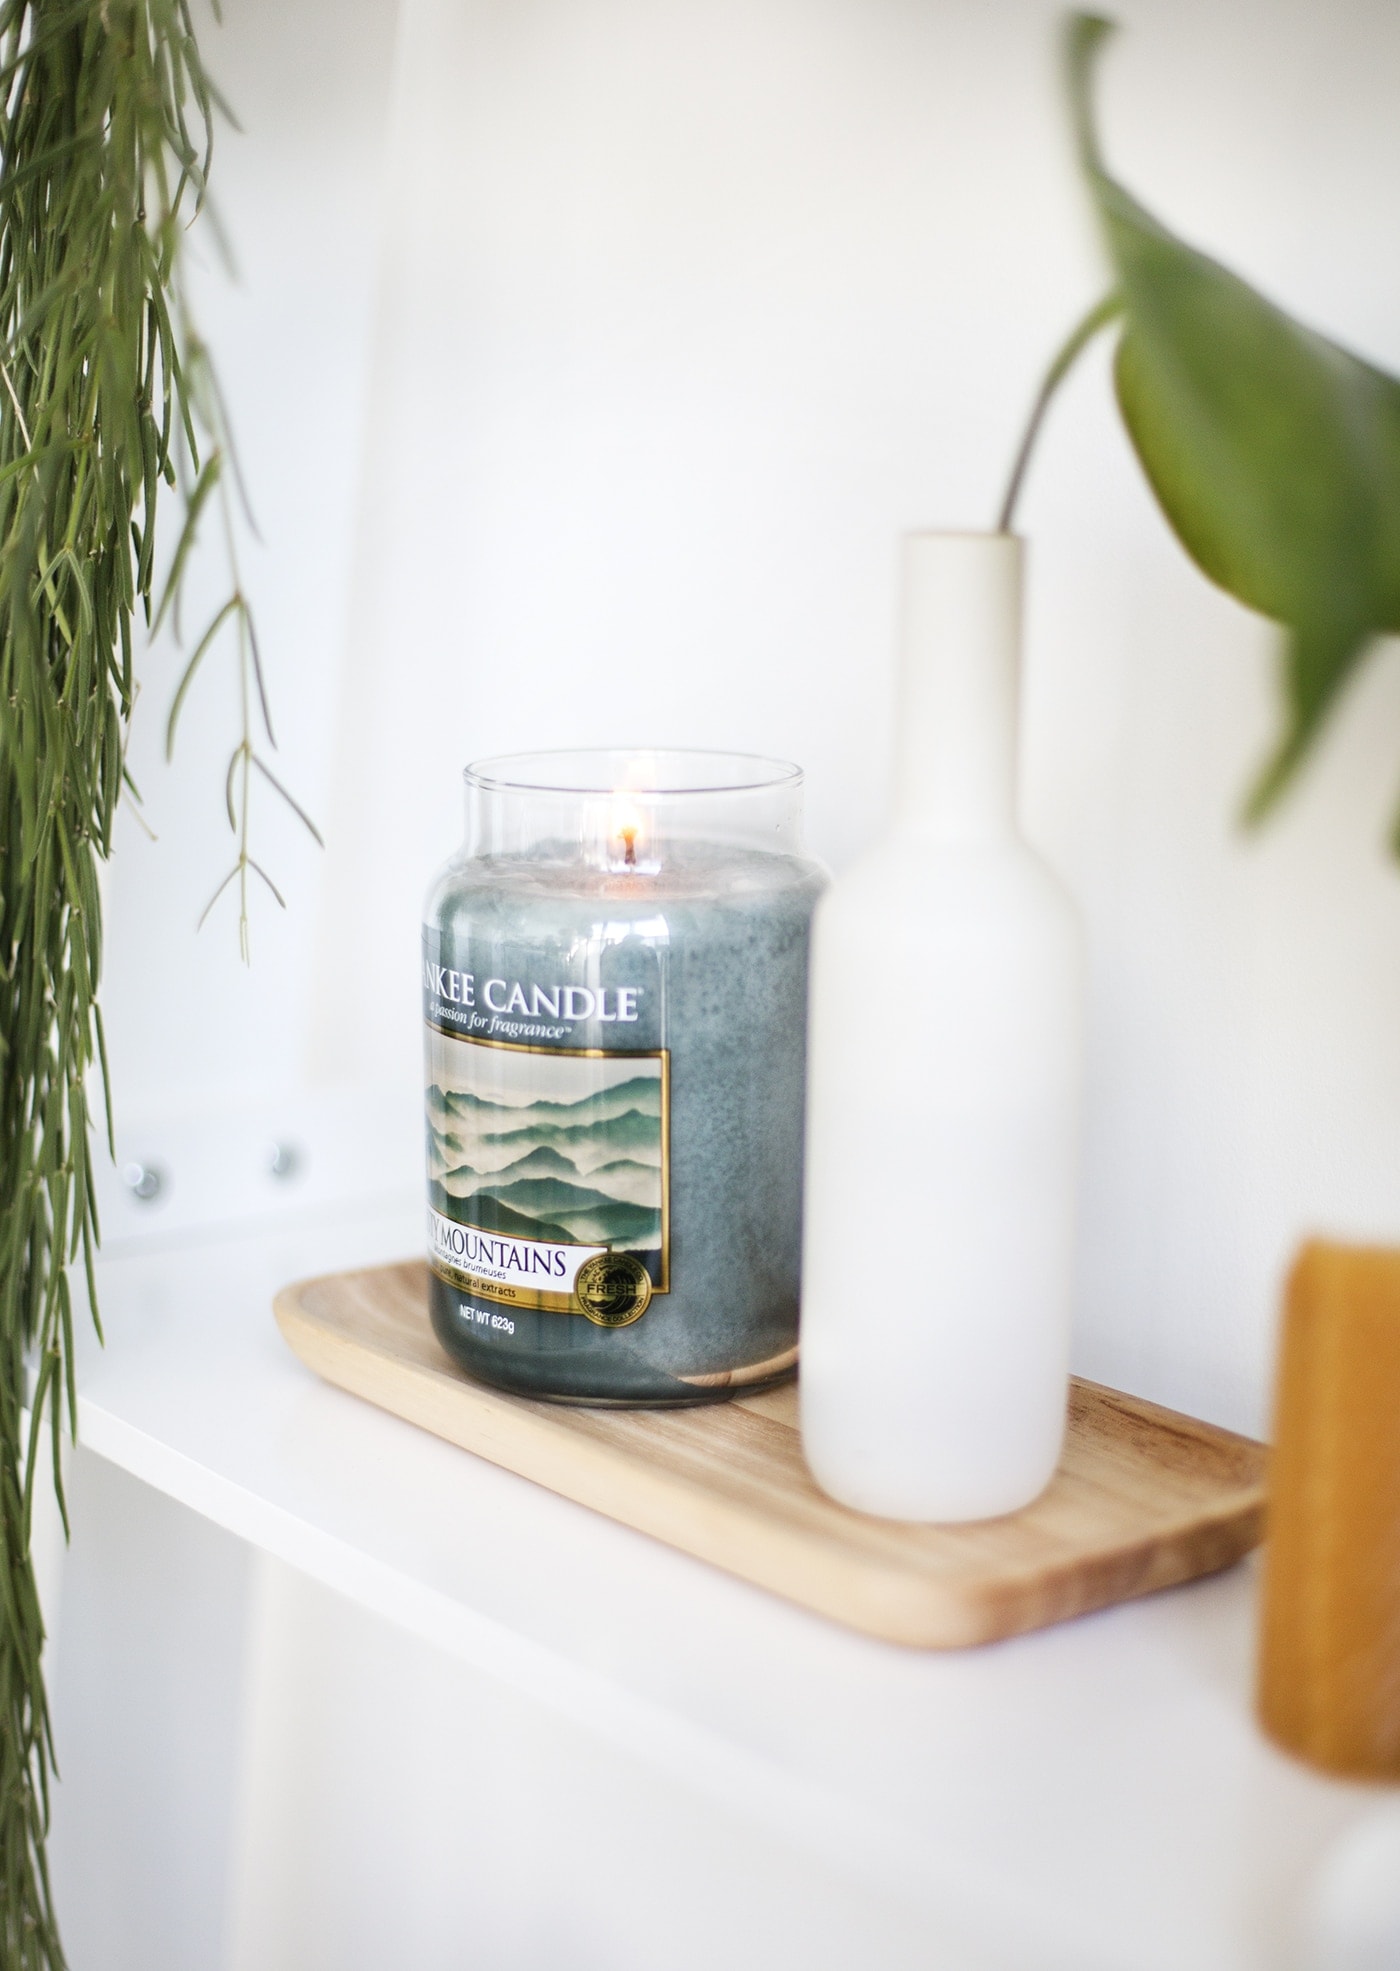 A Scent Tour Of Our Home with Yankee Candle